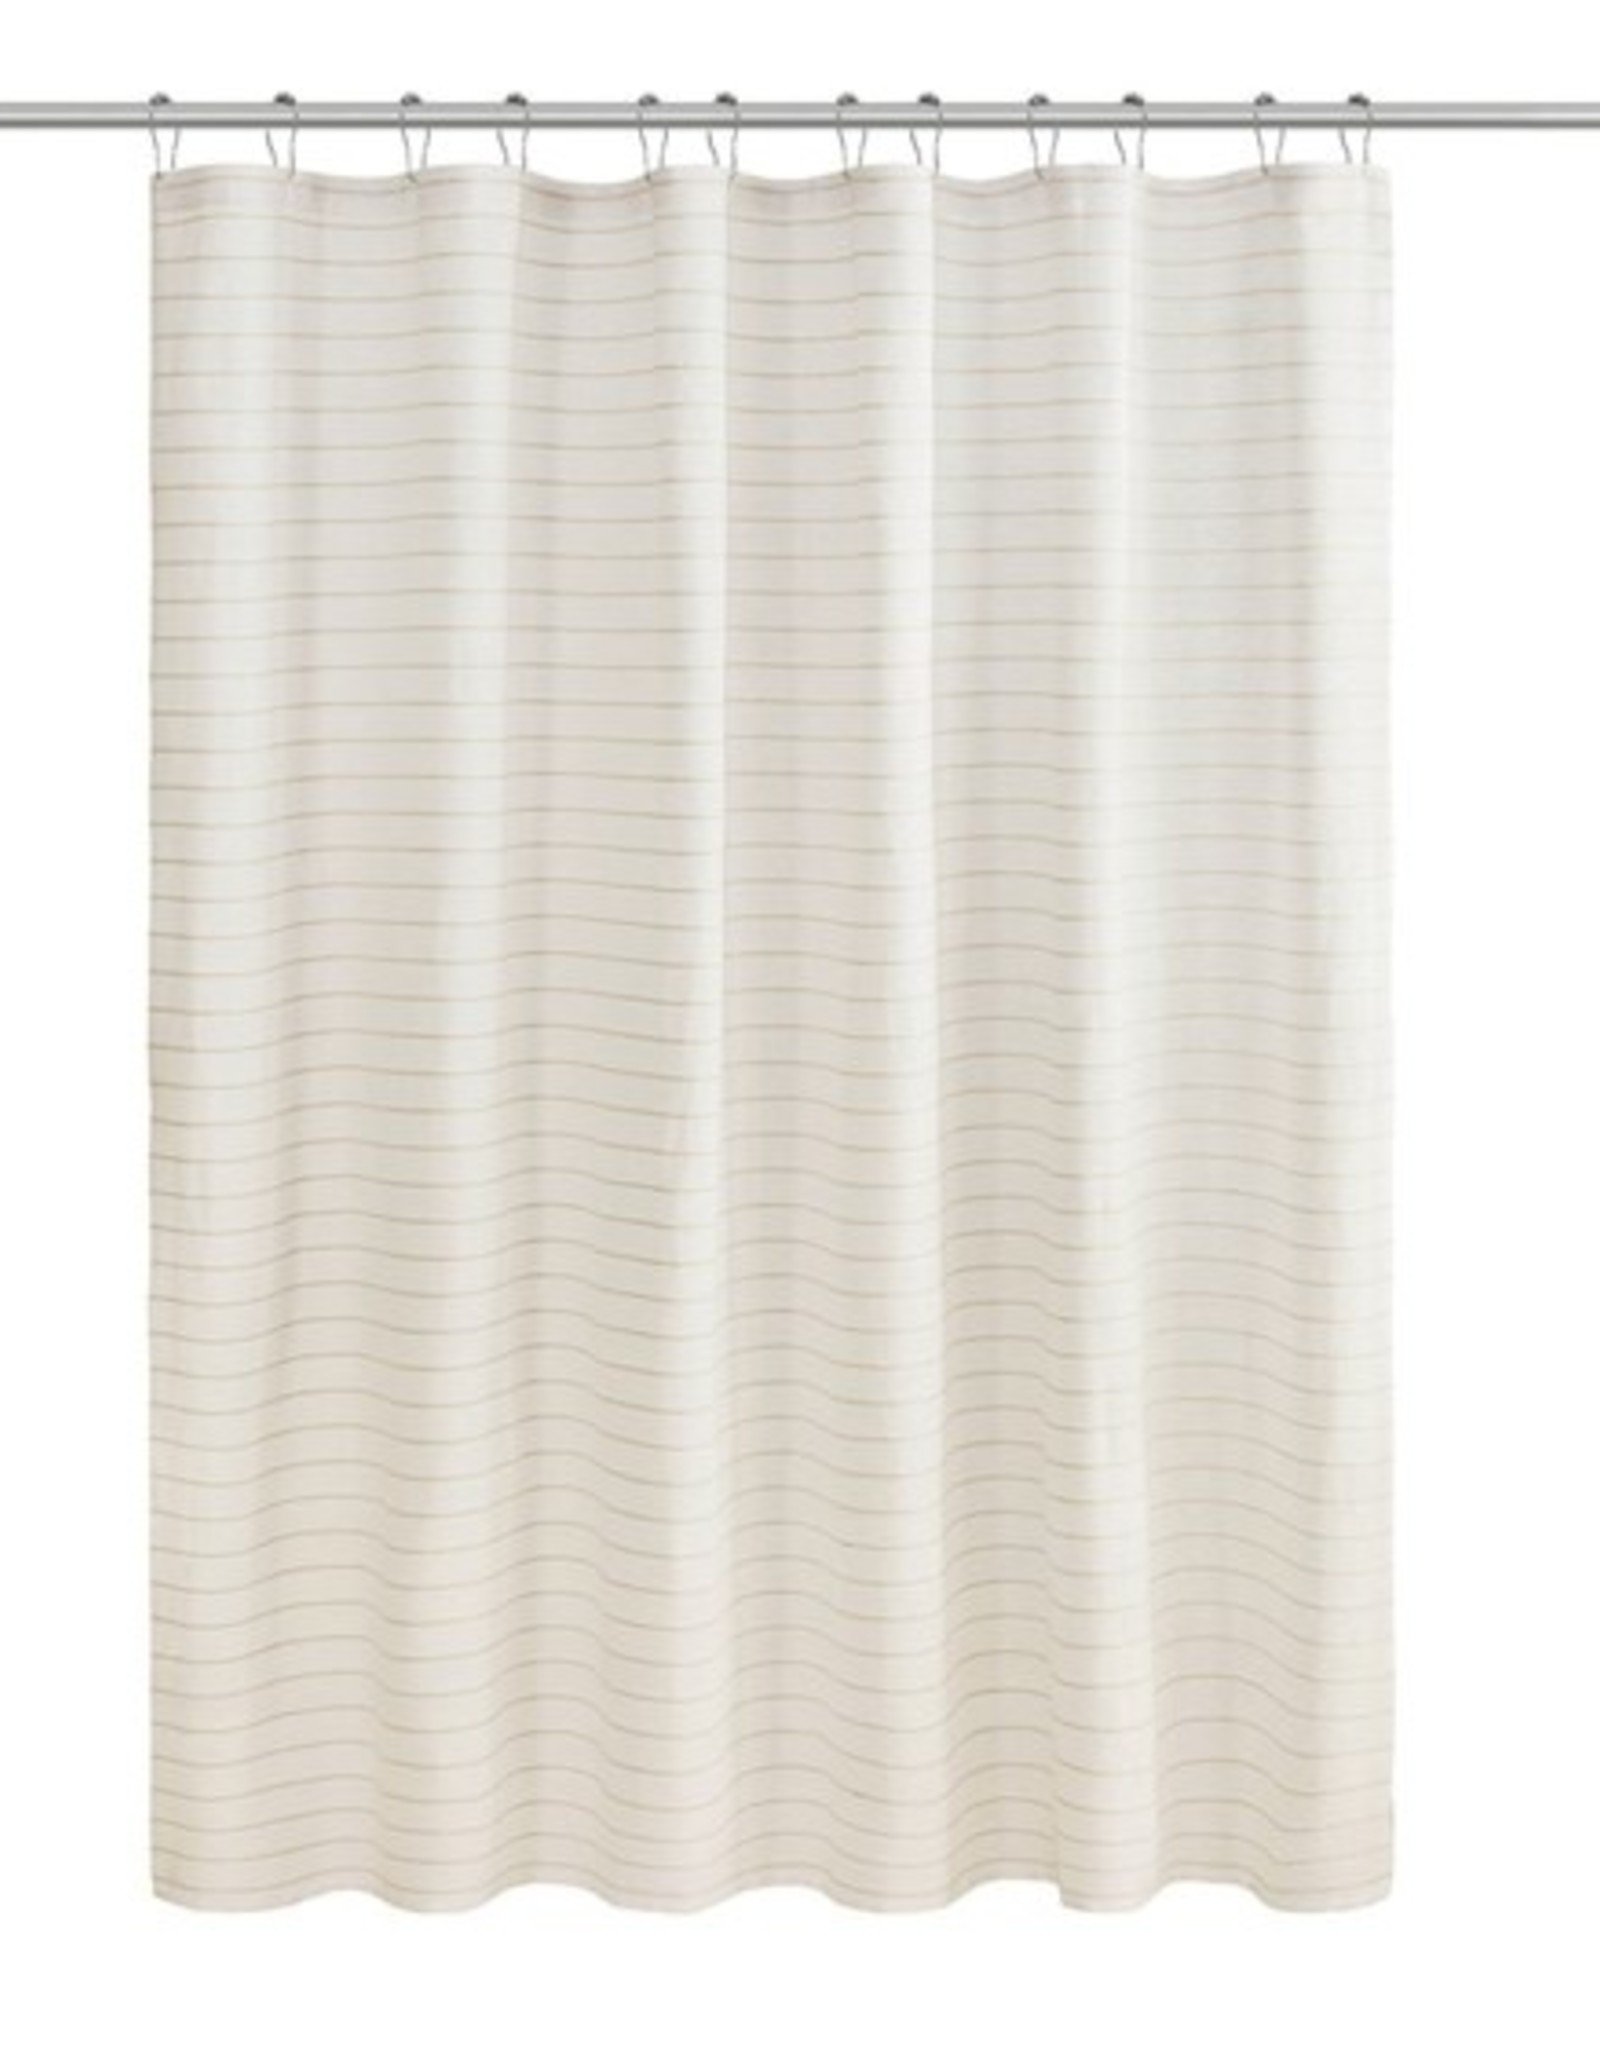 Ollixx Shower Curtain - Striped recycled fabrics